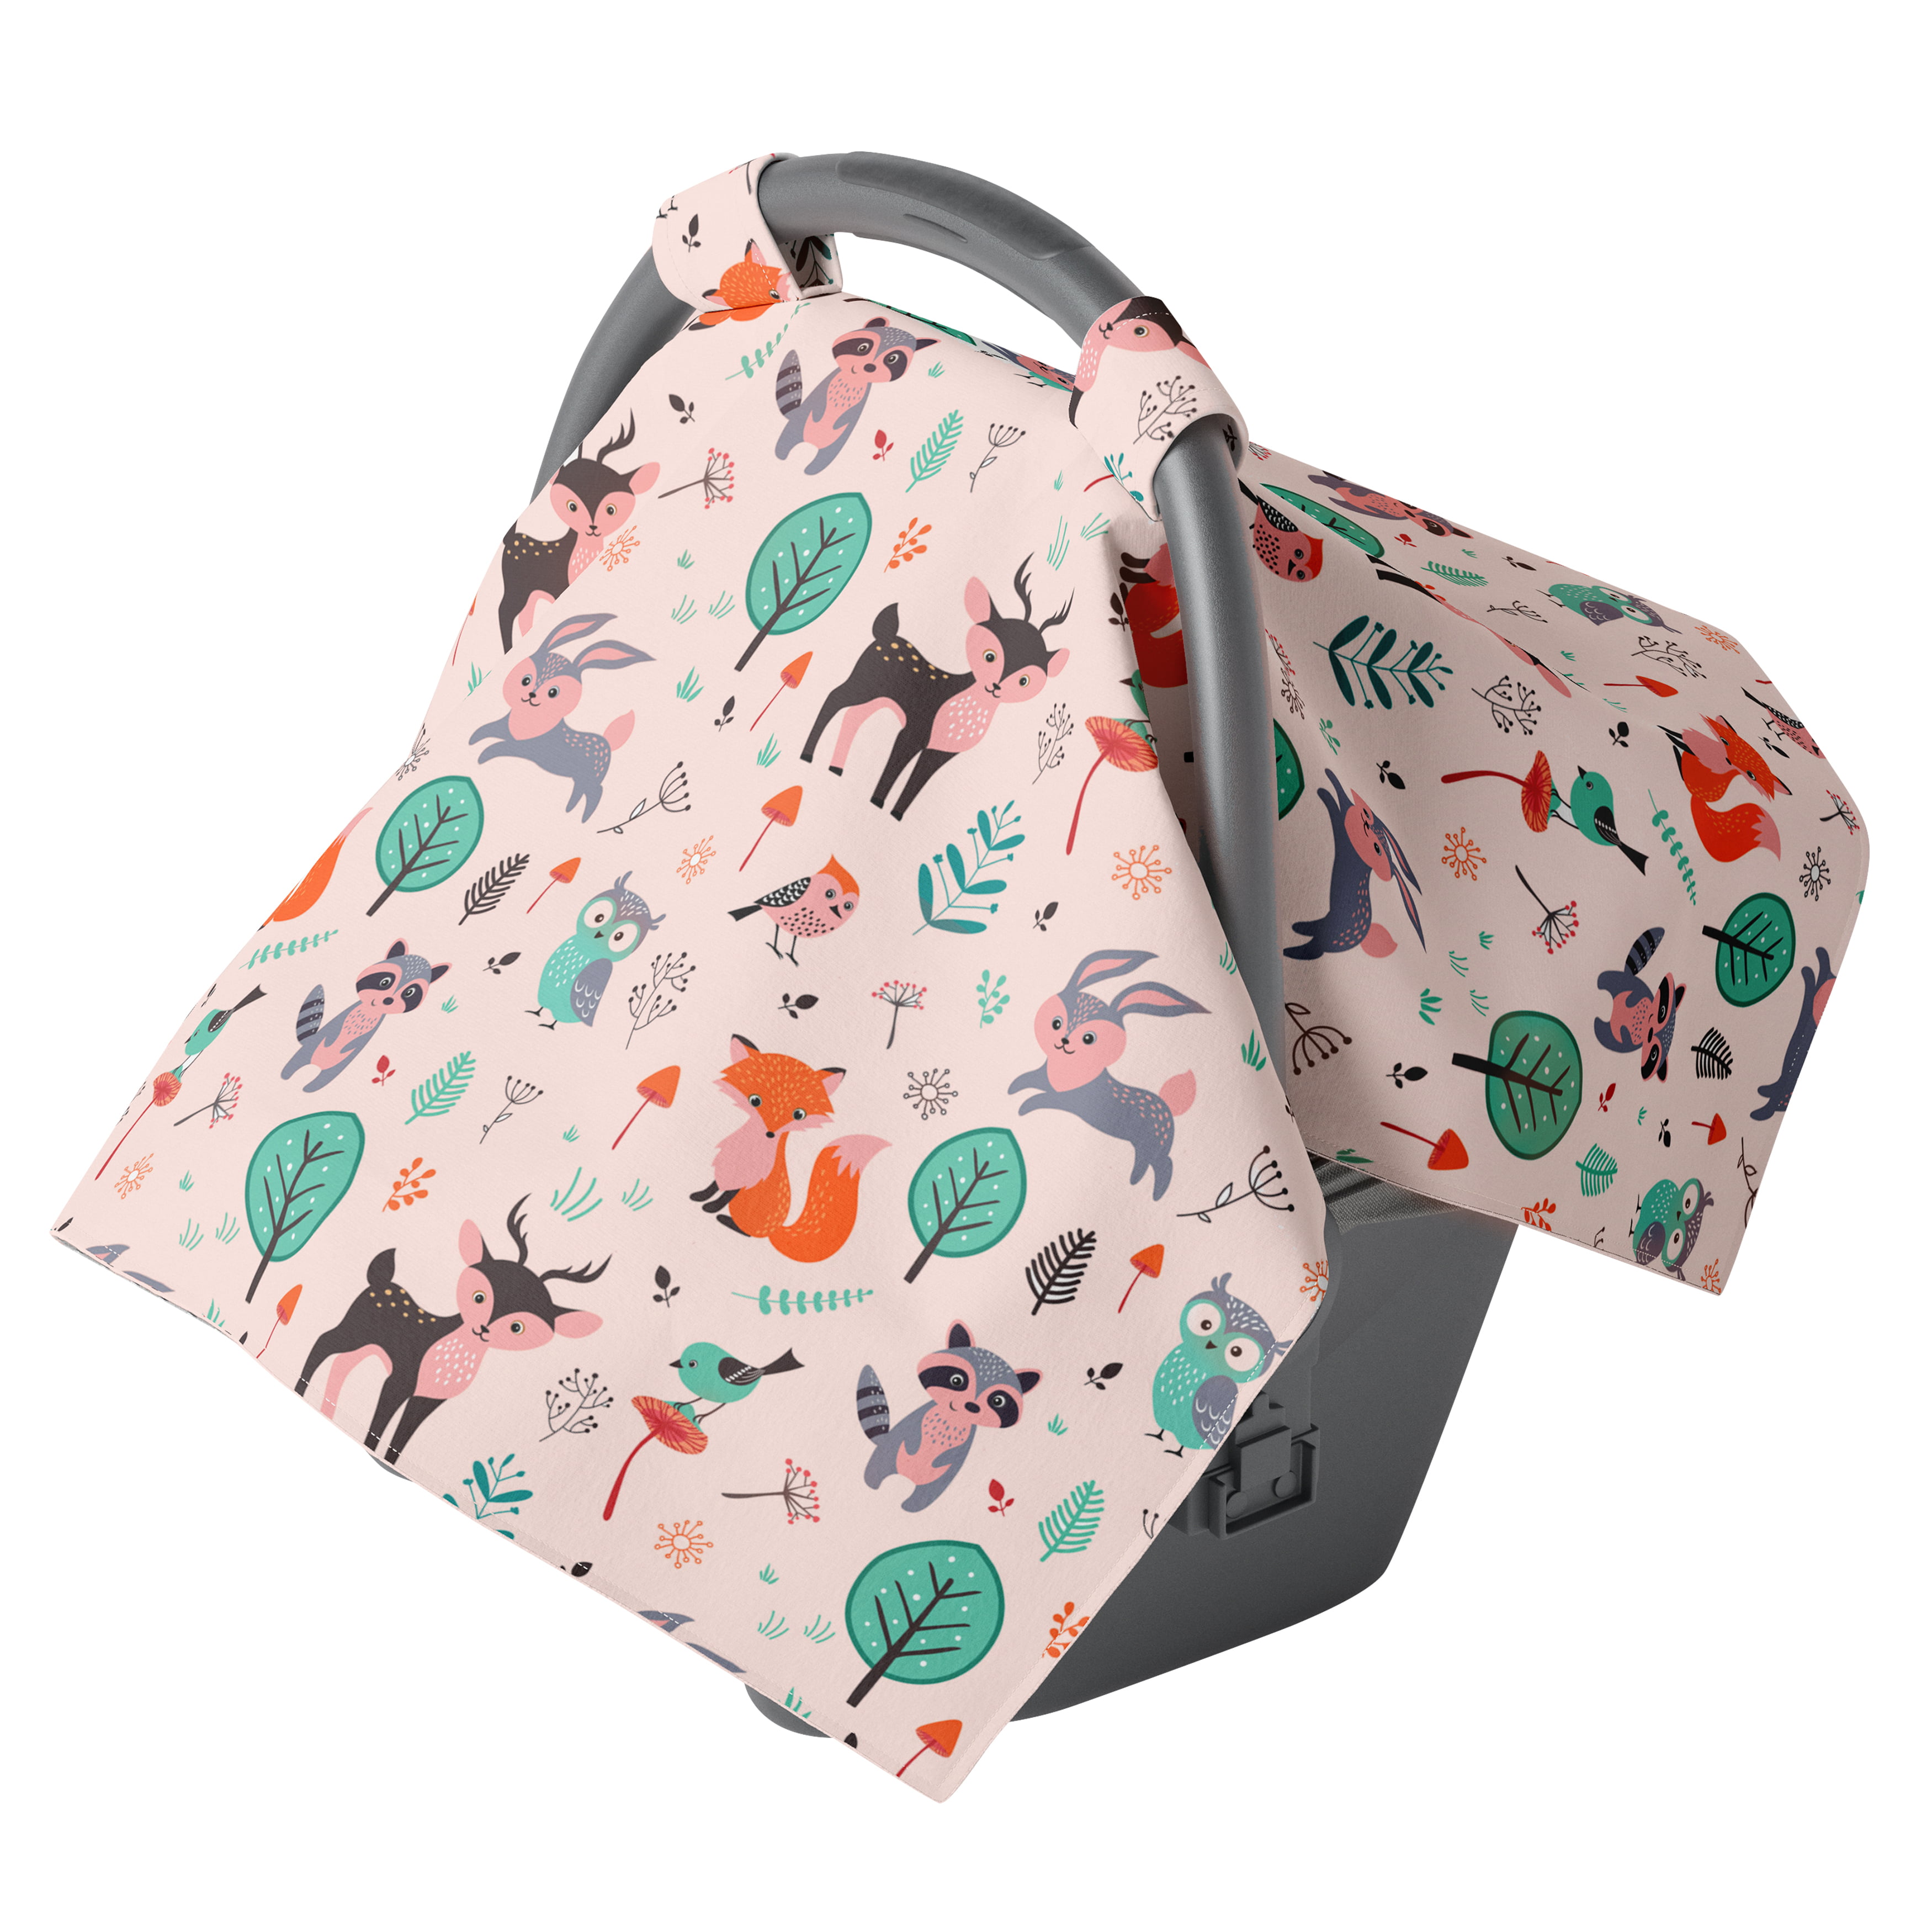 Car seat Covers for Babies - Carseat Canopy - Baby car seat Cover for